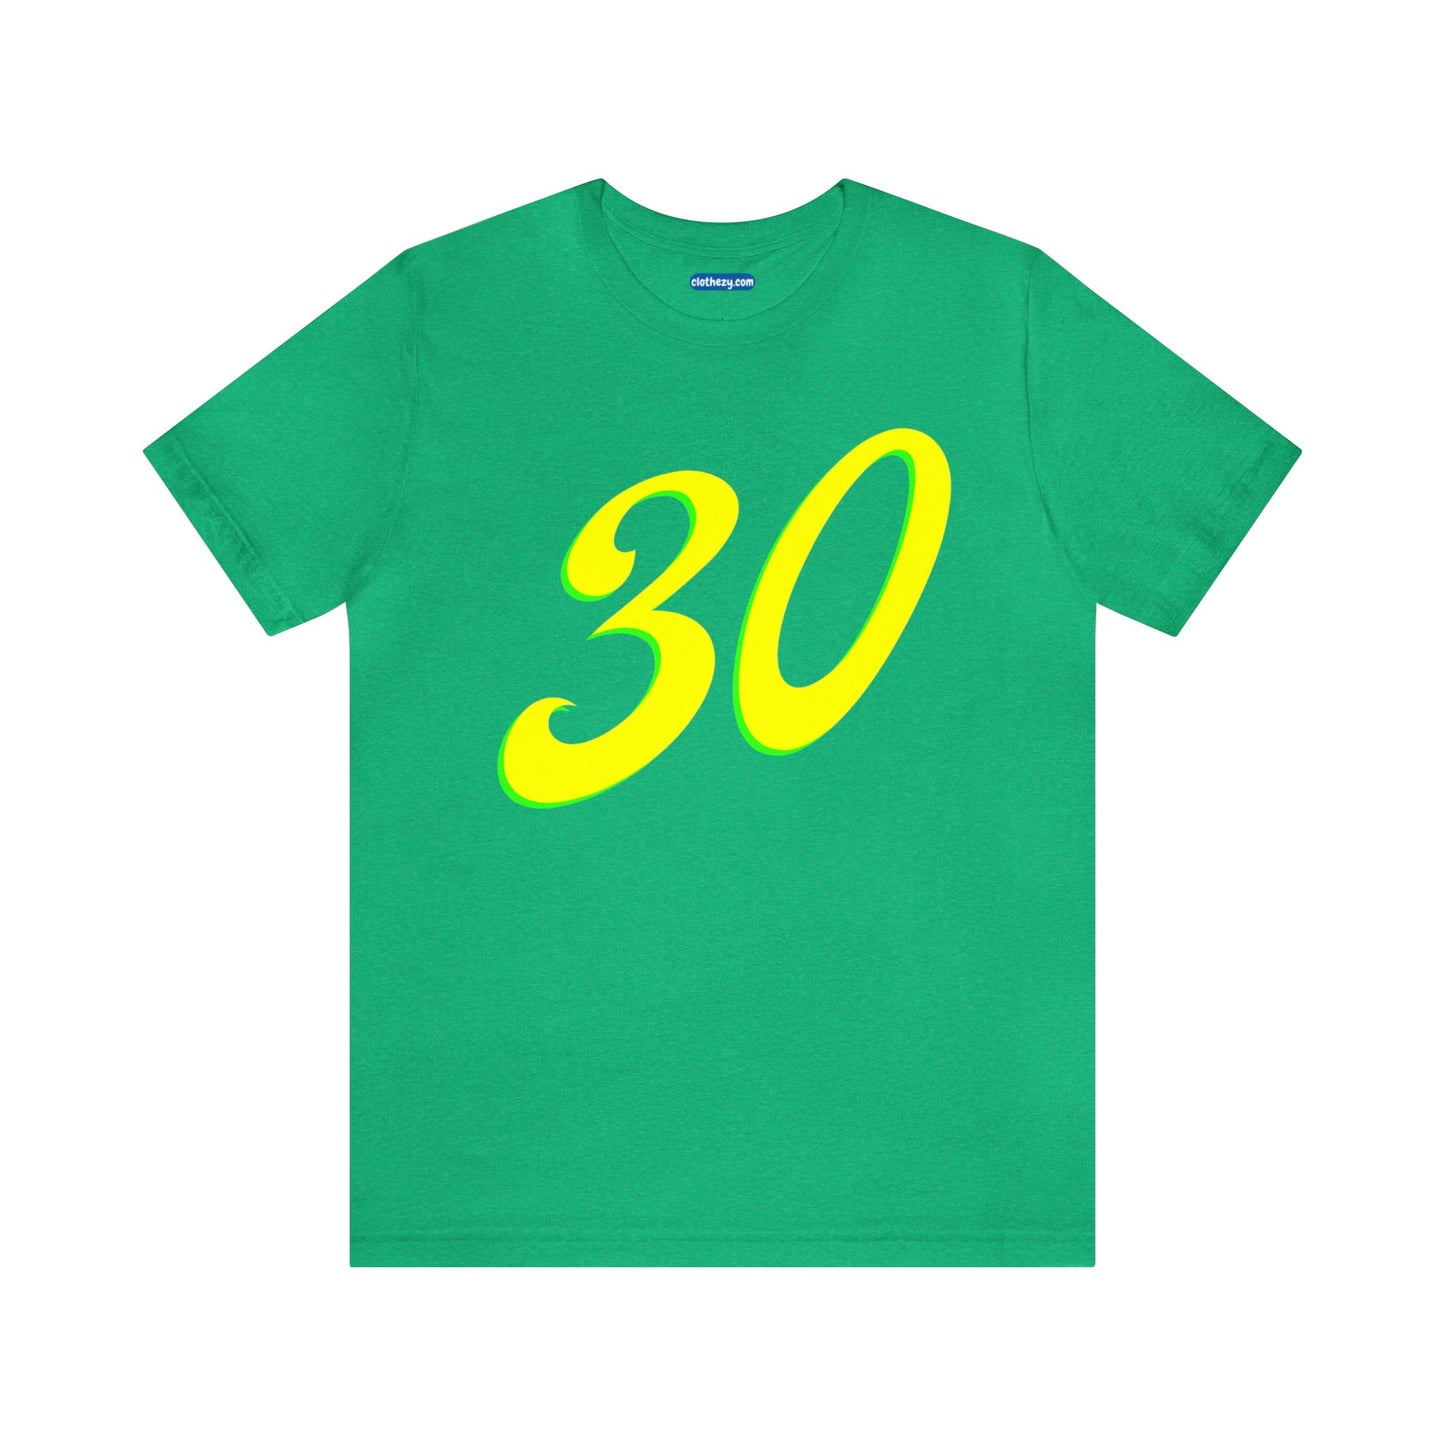 Number 30 Design - Soft Cotton Tee for birthdays and celebrations, Gift for friends and family, Multiple Options by clothezy.com in Green Heather Size Small - Buy Now